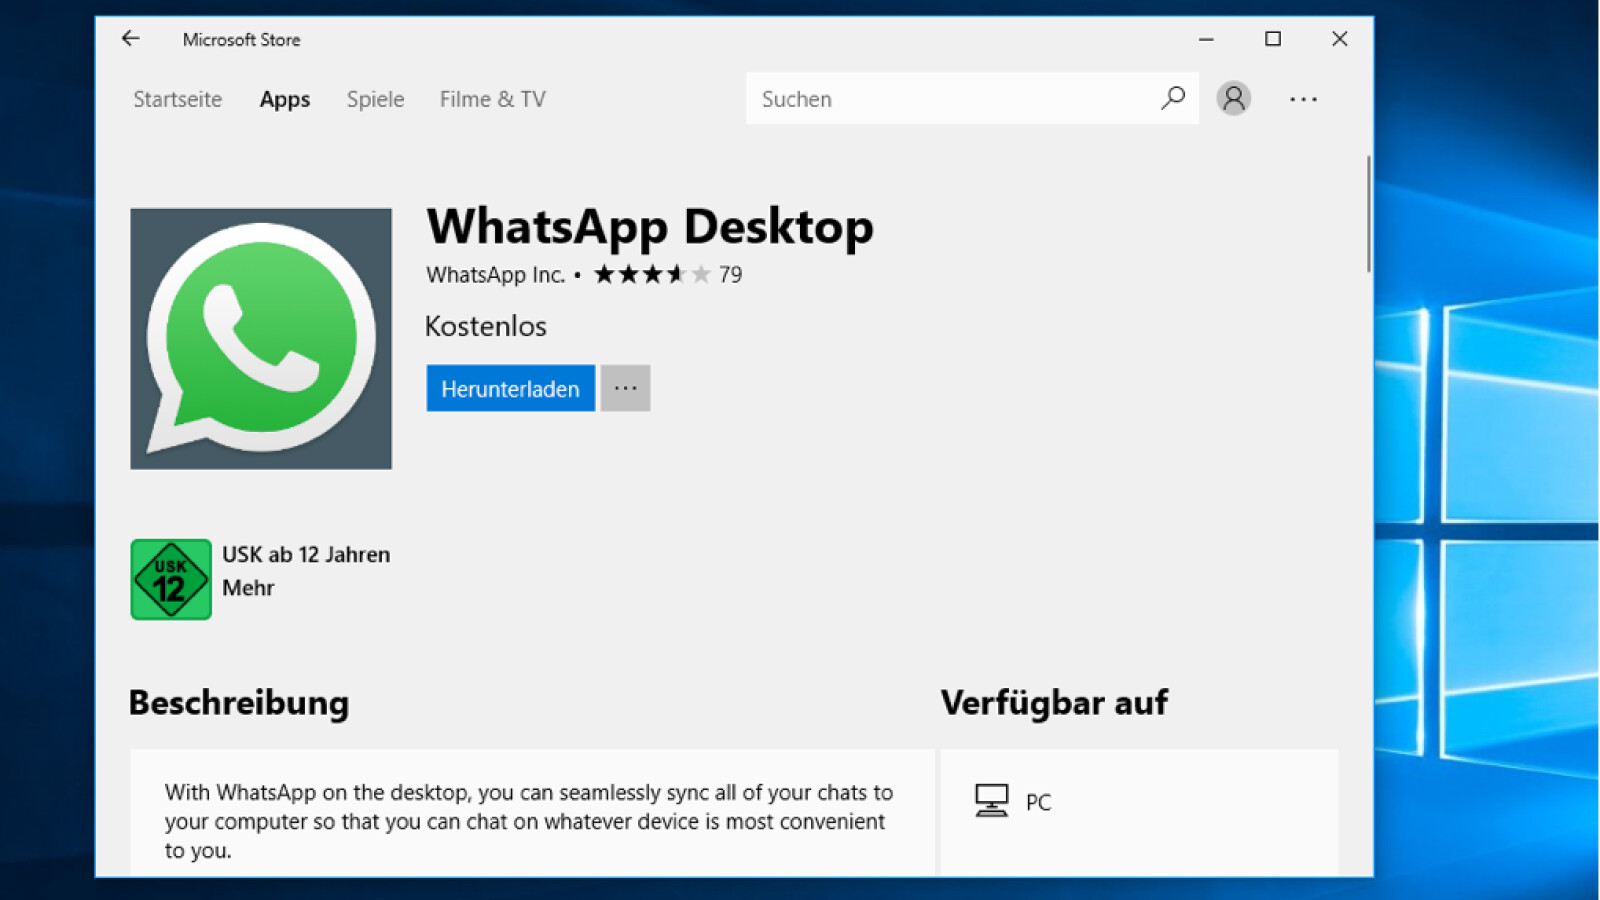 whatsapp free download for windows 10